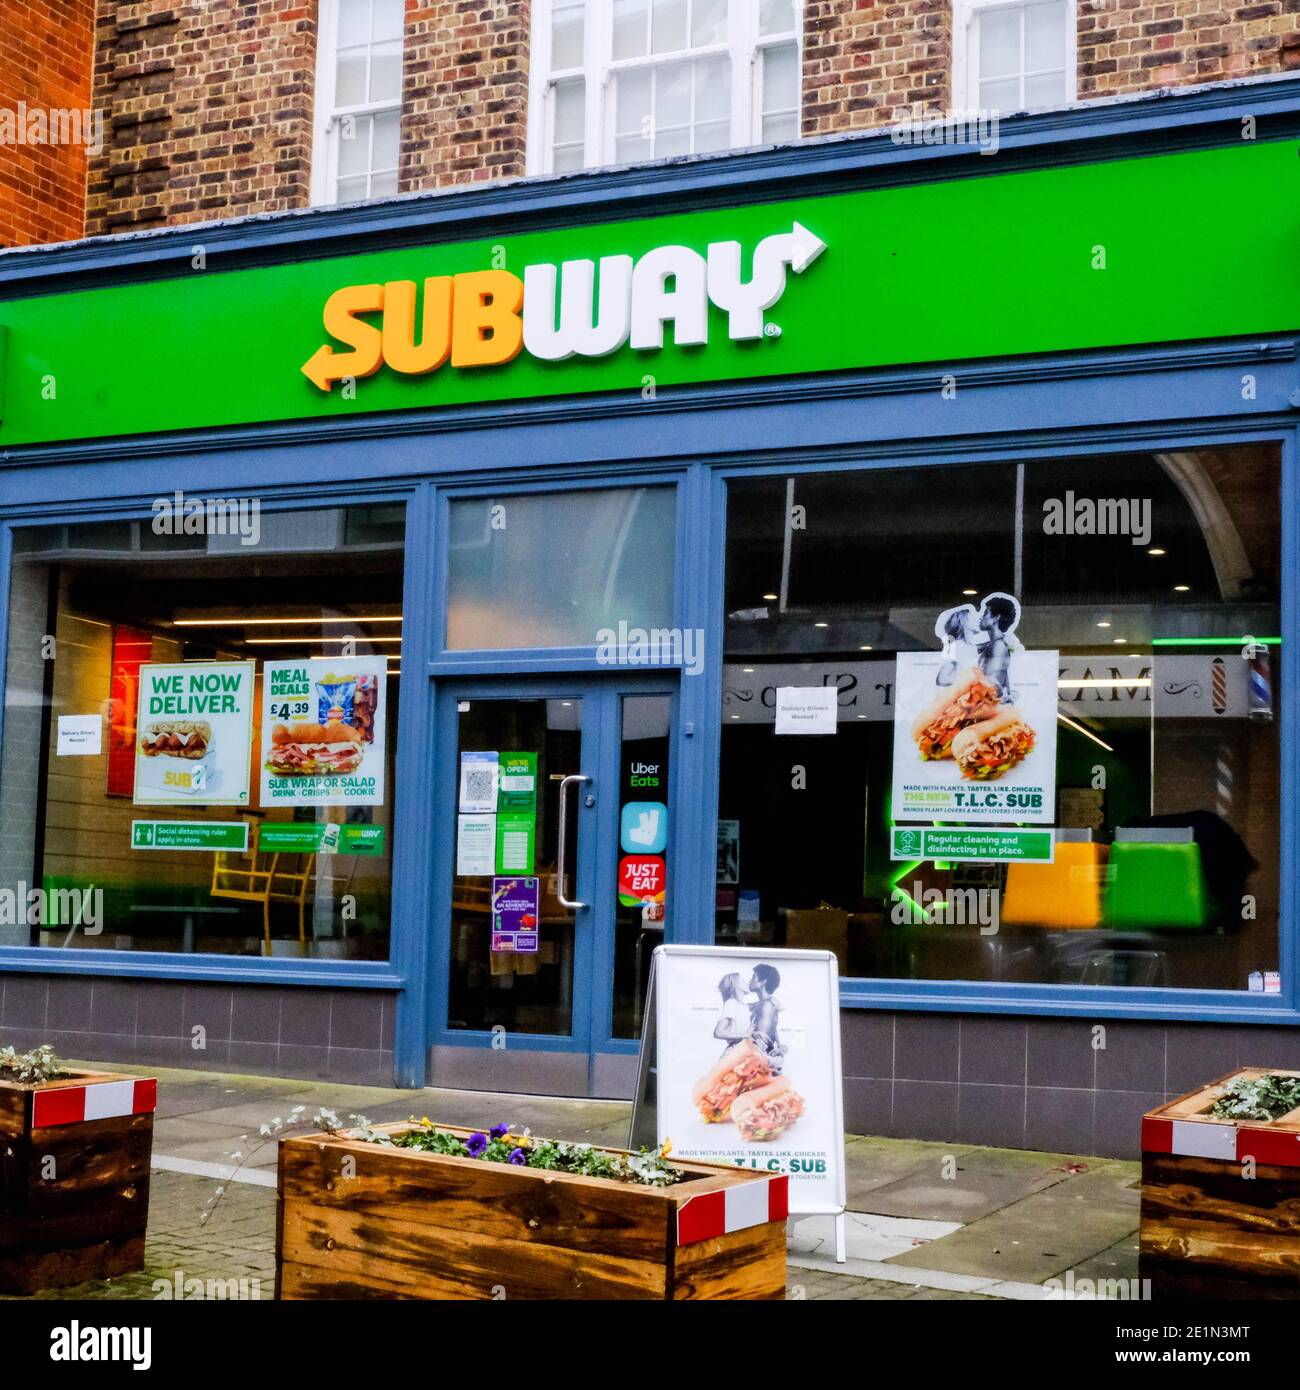 London UK, January 08 2021, Subway High Street Fast Food Takeaway Shop Front With No People During Covisd-19 Lockdown, Open For Takeout Food Only Stock Photo